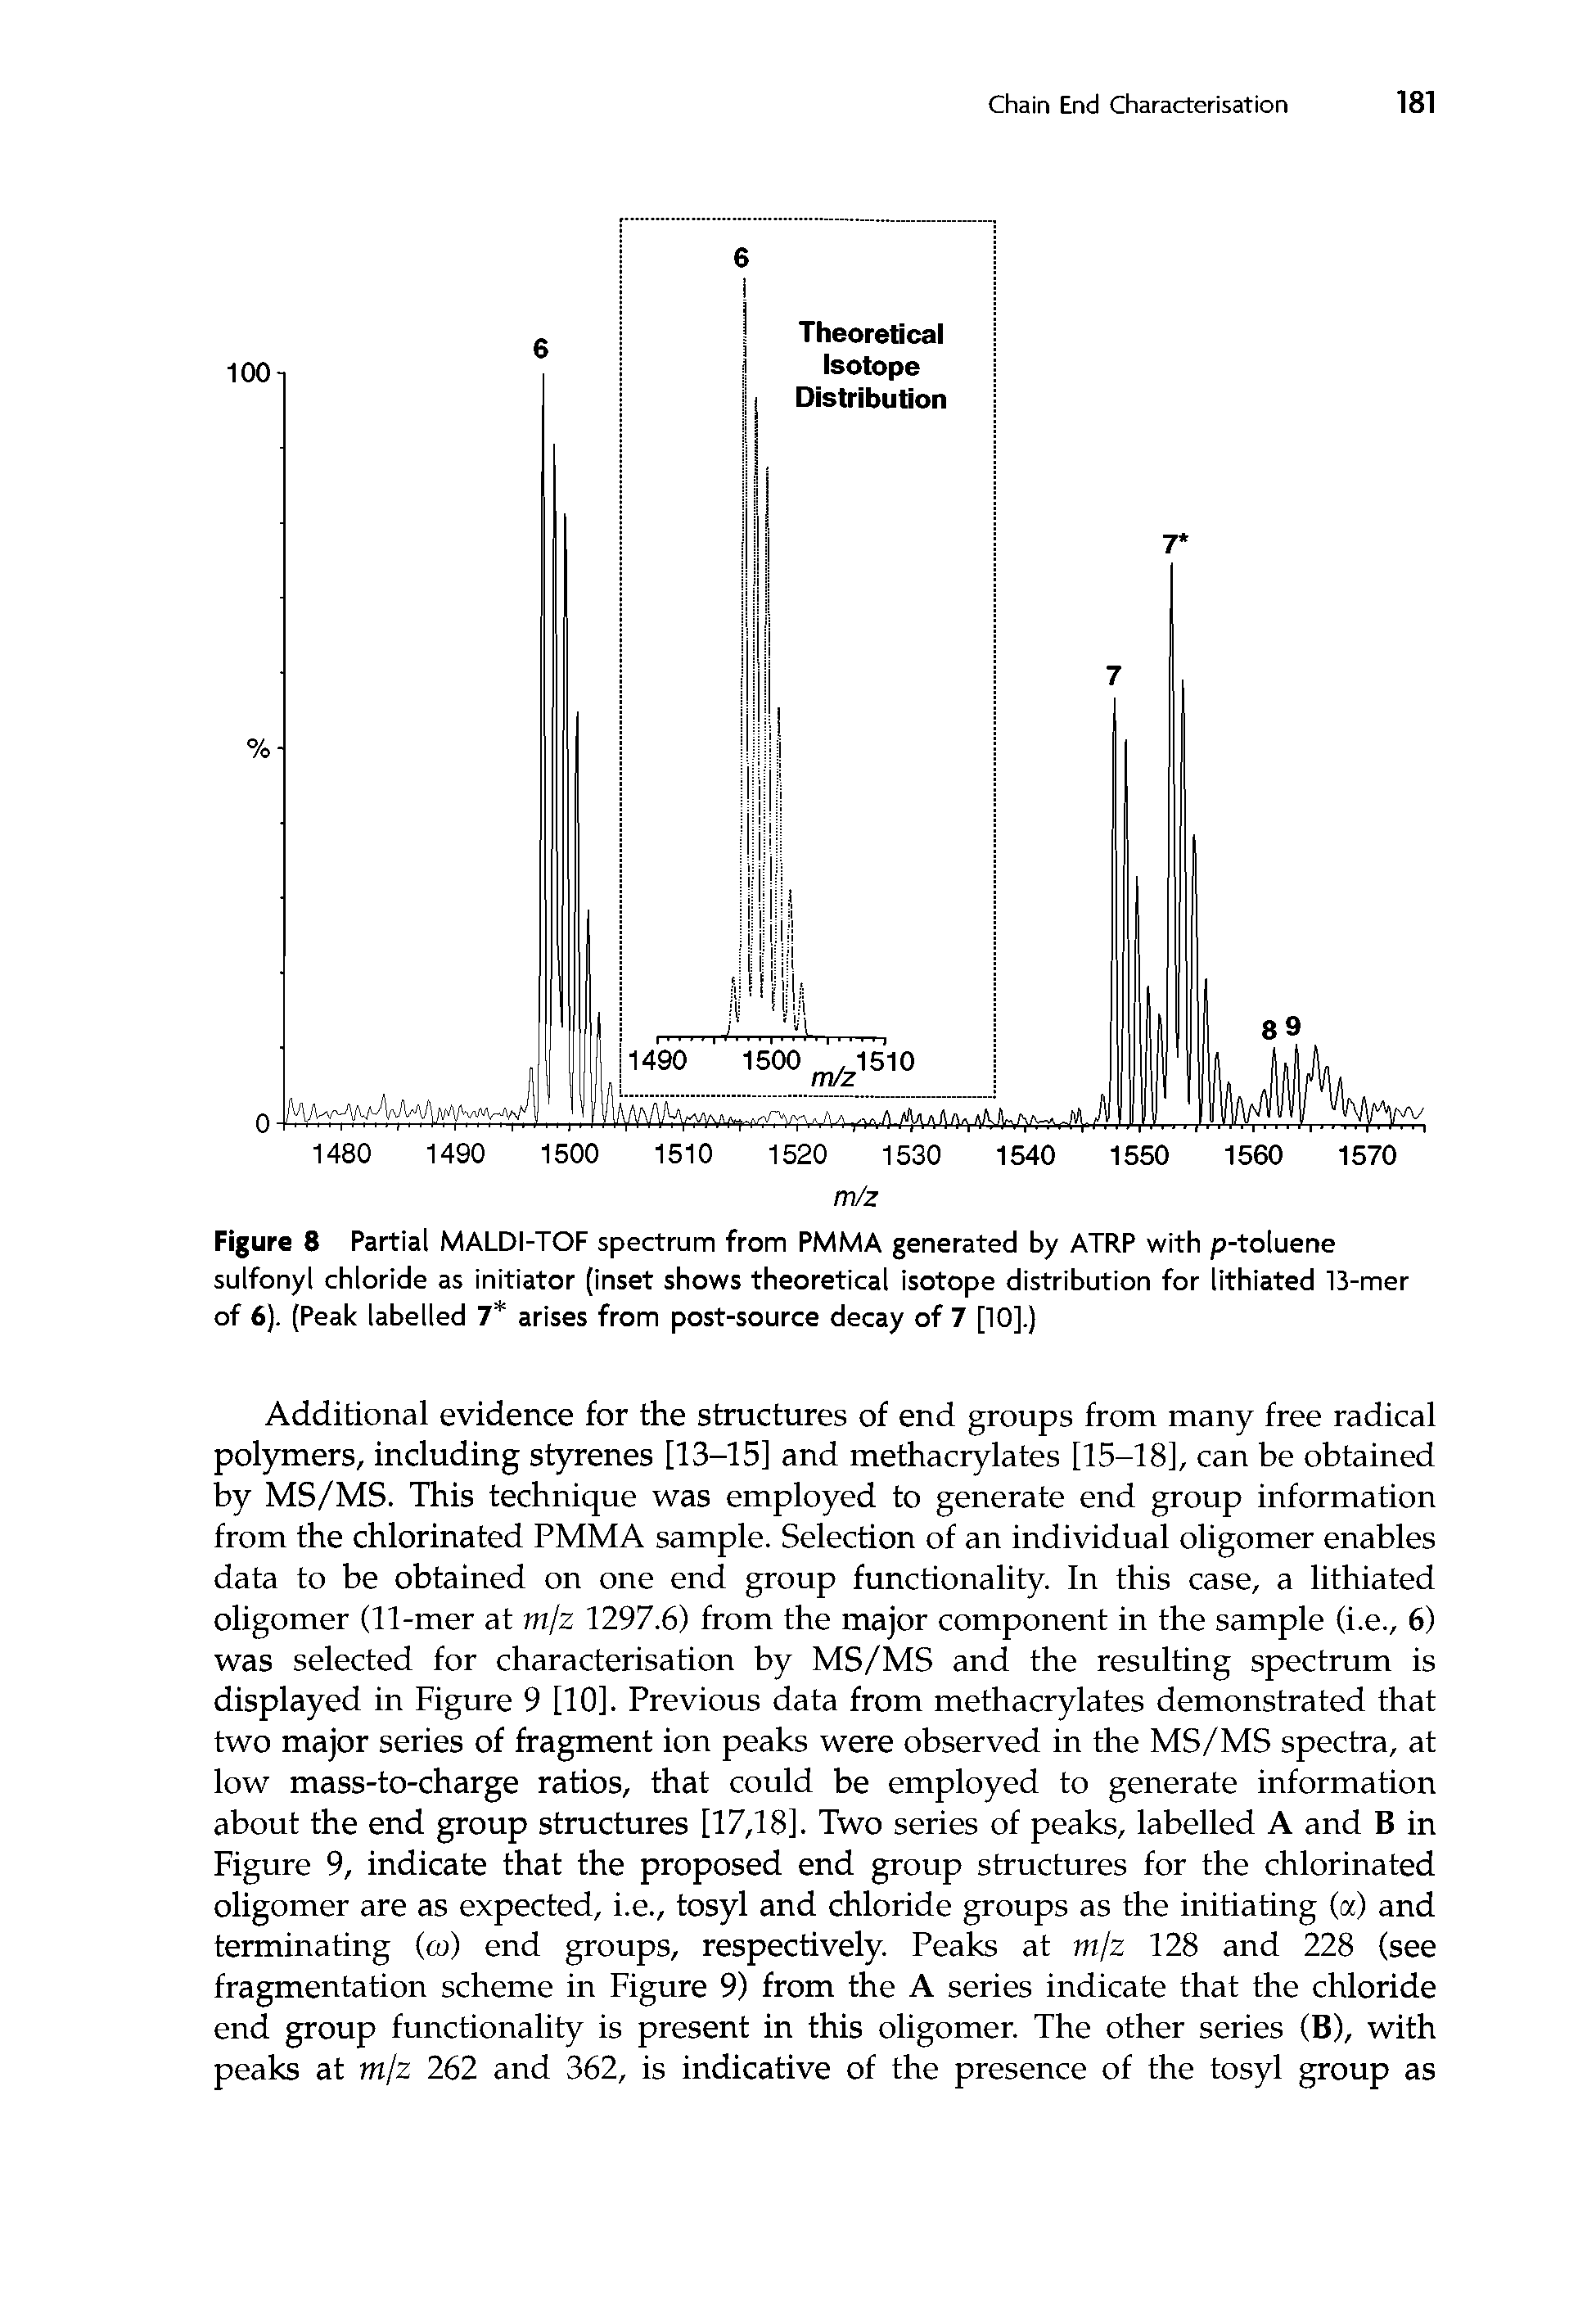 Figure 8 Partial MALDI-TOF spectrum from PMMA generated by ATRP with p-toluene sulfonyl chloride as initiator (inset shows theoretical isotope distribution for lithiated 13-mer of 6). (Peak labelled 7 arises from post-source decay of 7 [10].)...